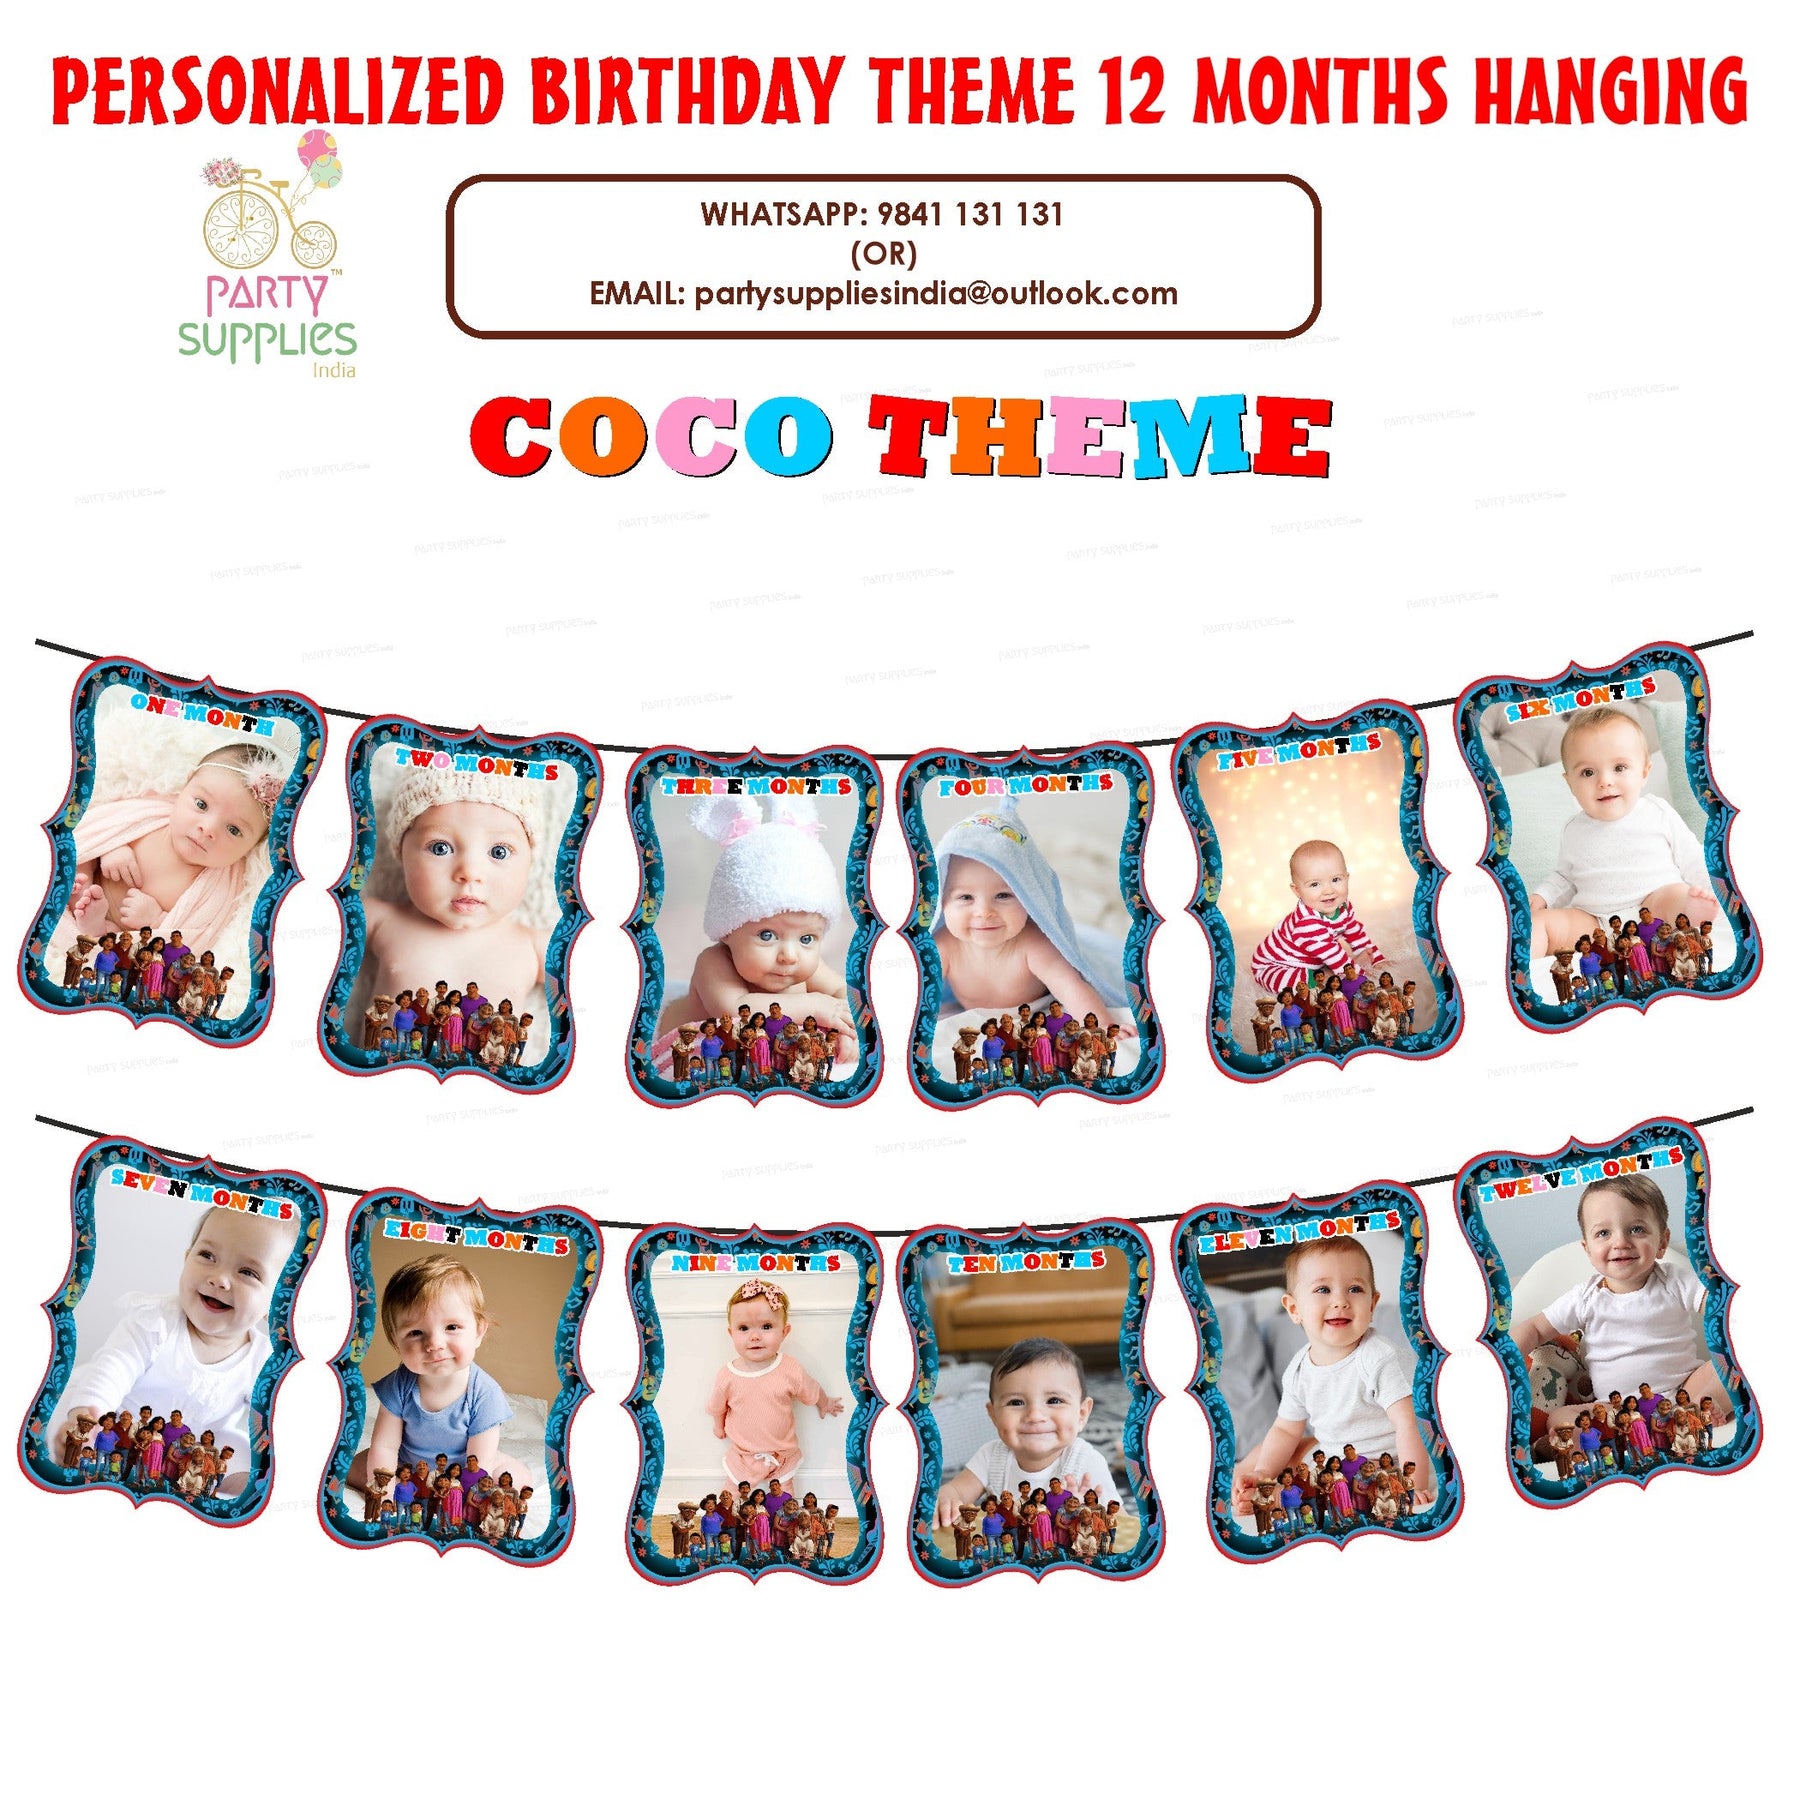 PSI Coco Theme 12 Months Photo Banner